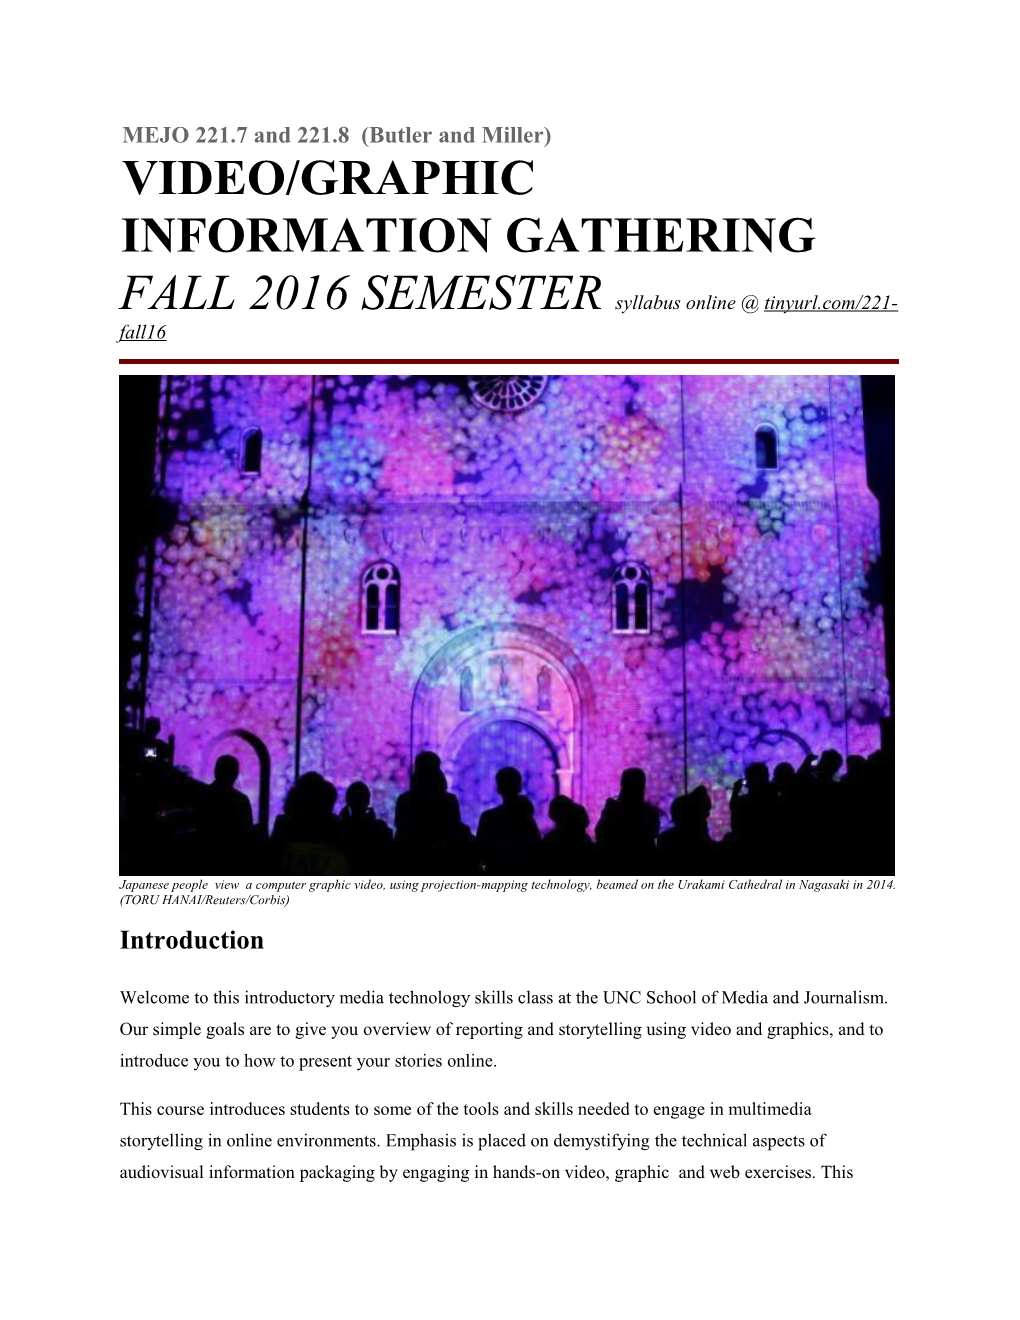 Video/Graphic Information Gathering